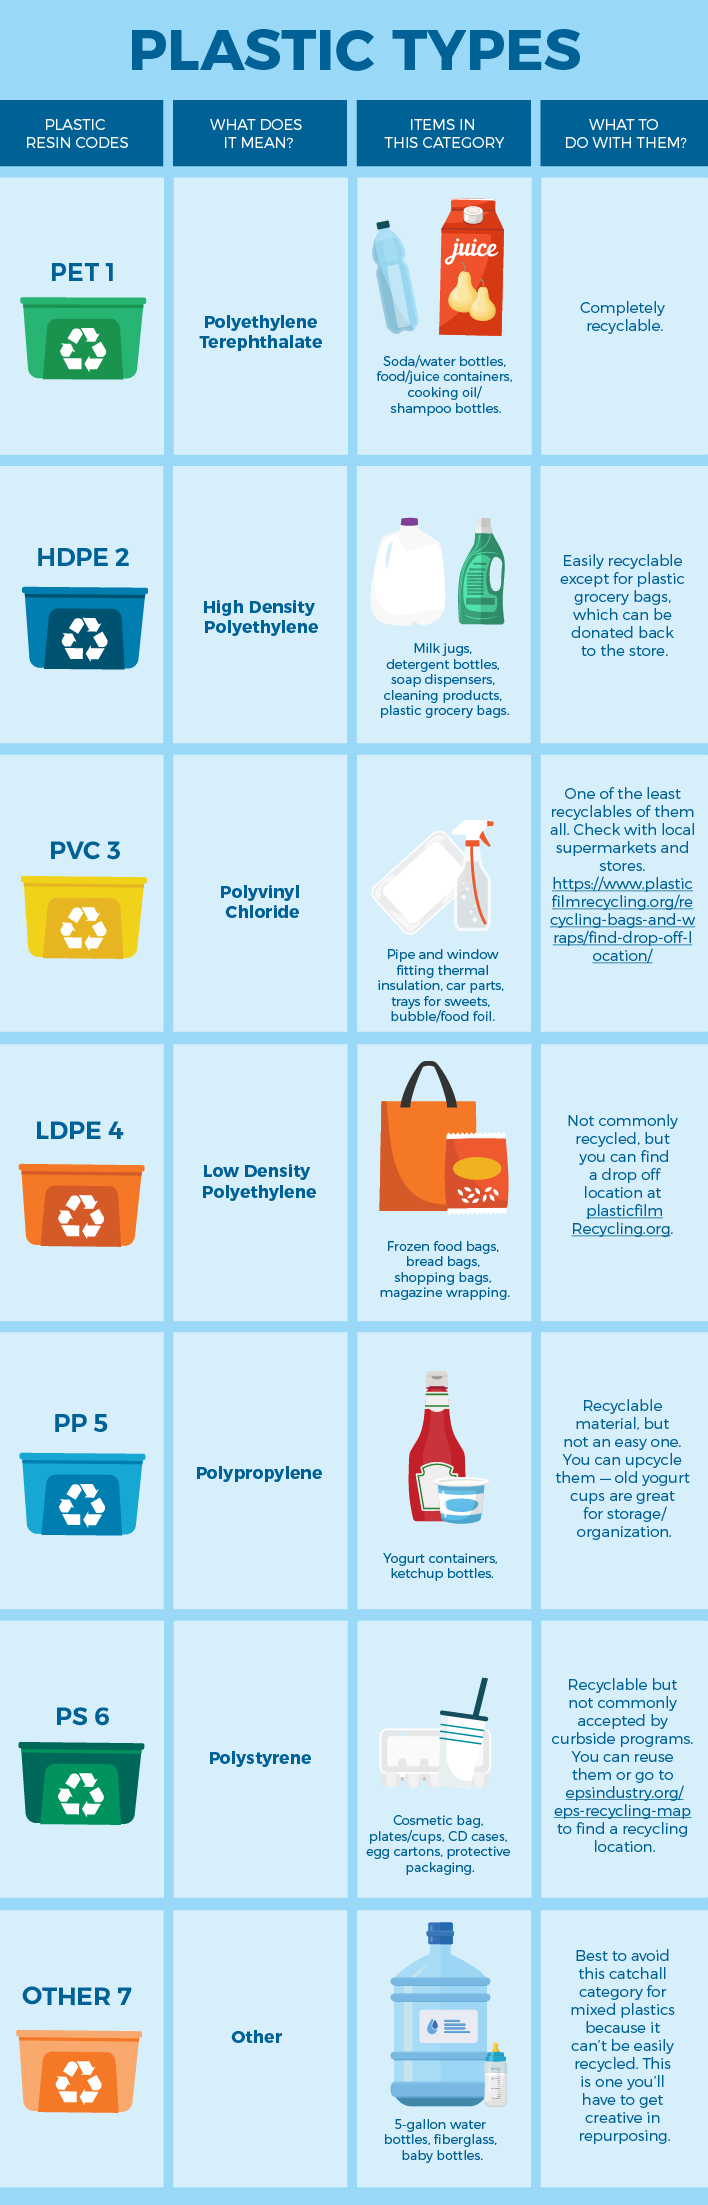 Infographic showing the various types of plastics and how they can be recycled.